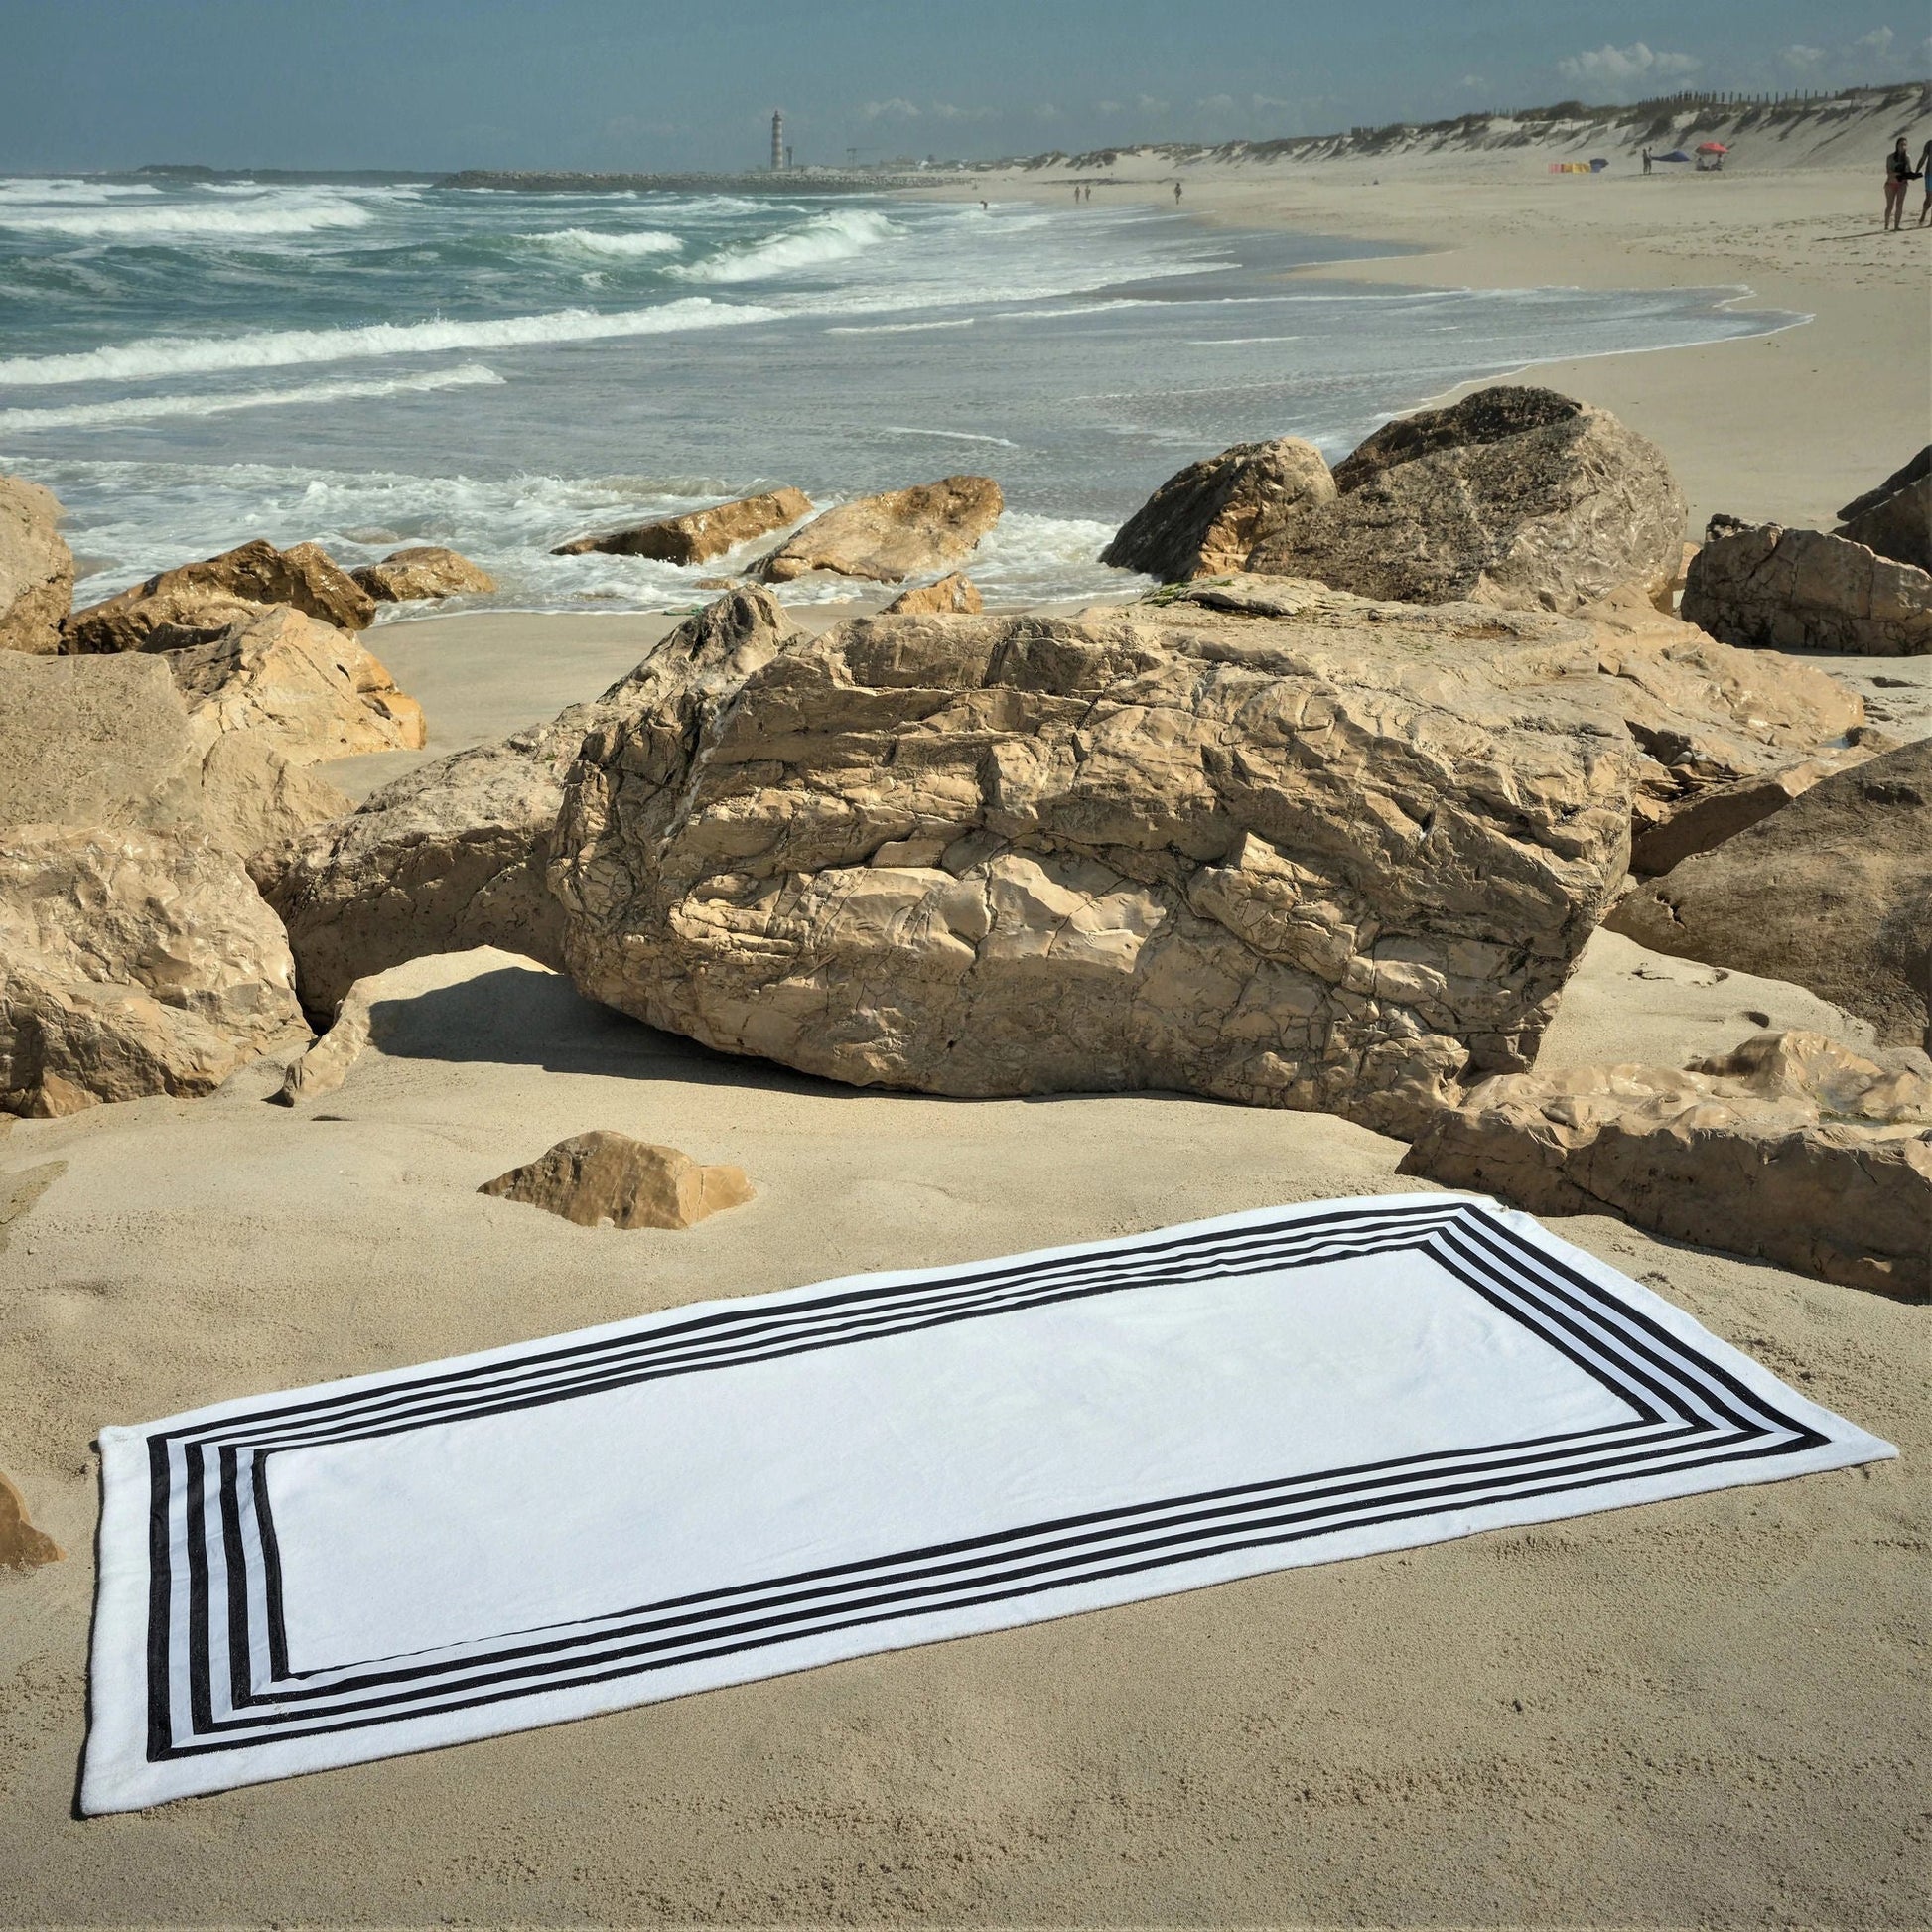 CANNES Luxury Black and White Egyptian Cotton Beach Towel - |VESIMI Design| Luxury and Rustic bathrooms online